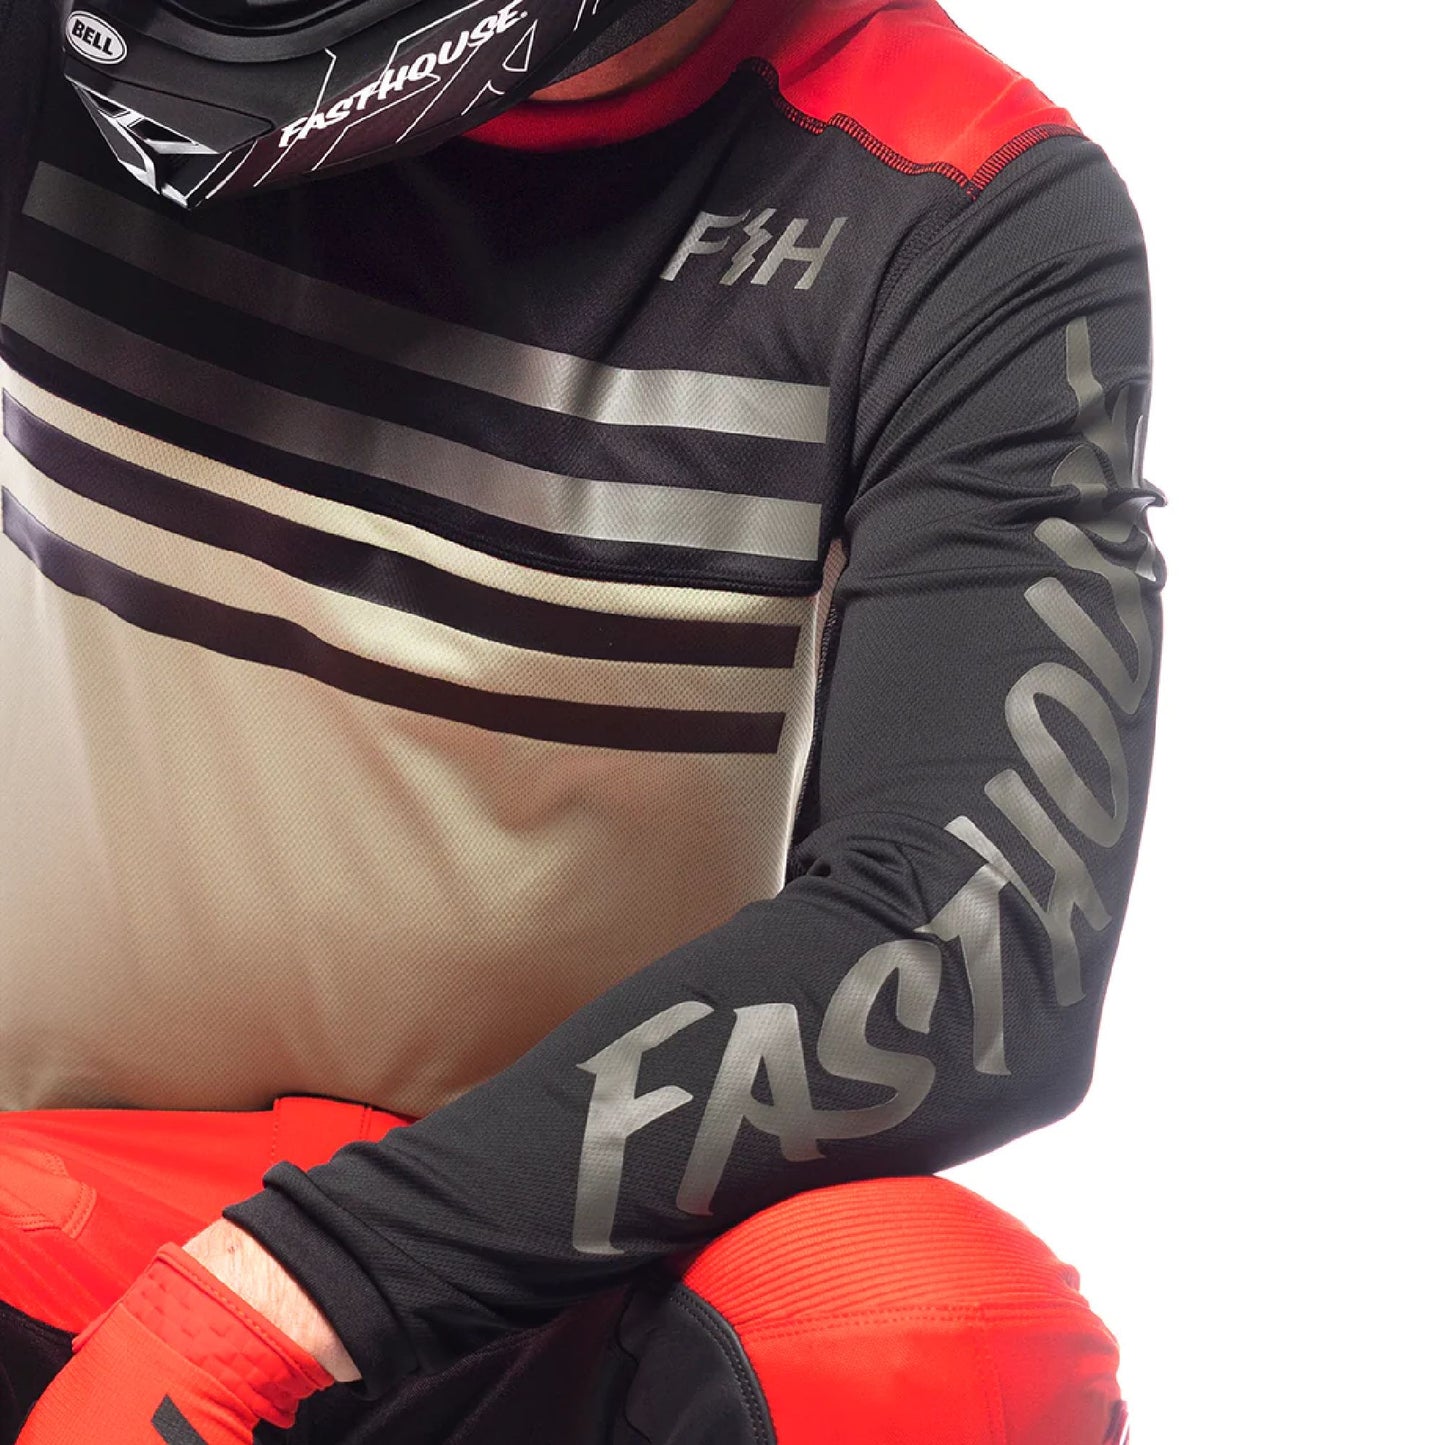 Fasthouse Grindhouse Tempo Jersey Black Infrared Bike Jerseys